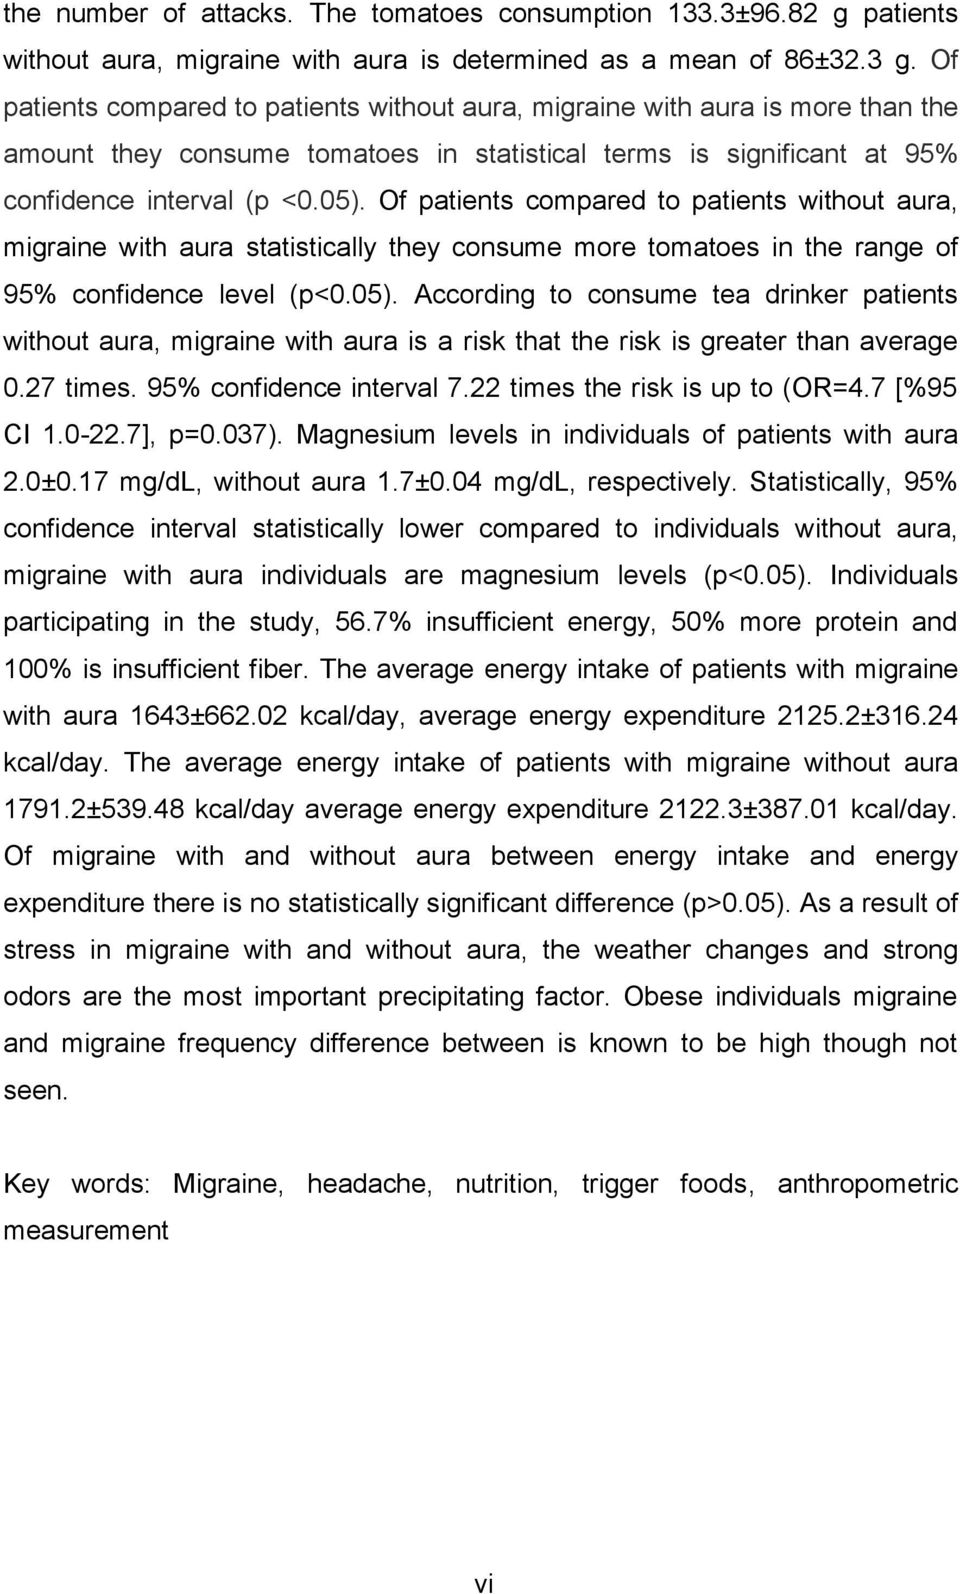 Of patients compared to patients without aura, migraine with aura statistically they consume more tomatoes in the range of 95% confidence level (p<0.05).